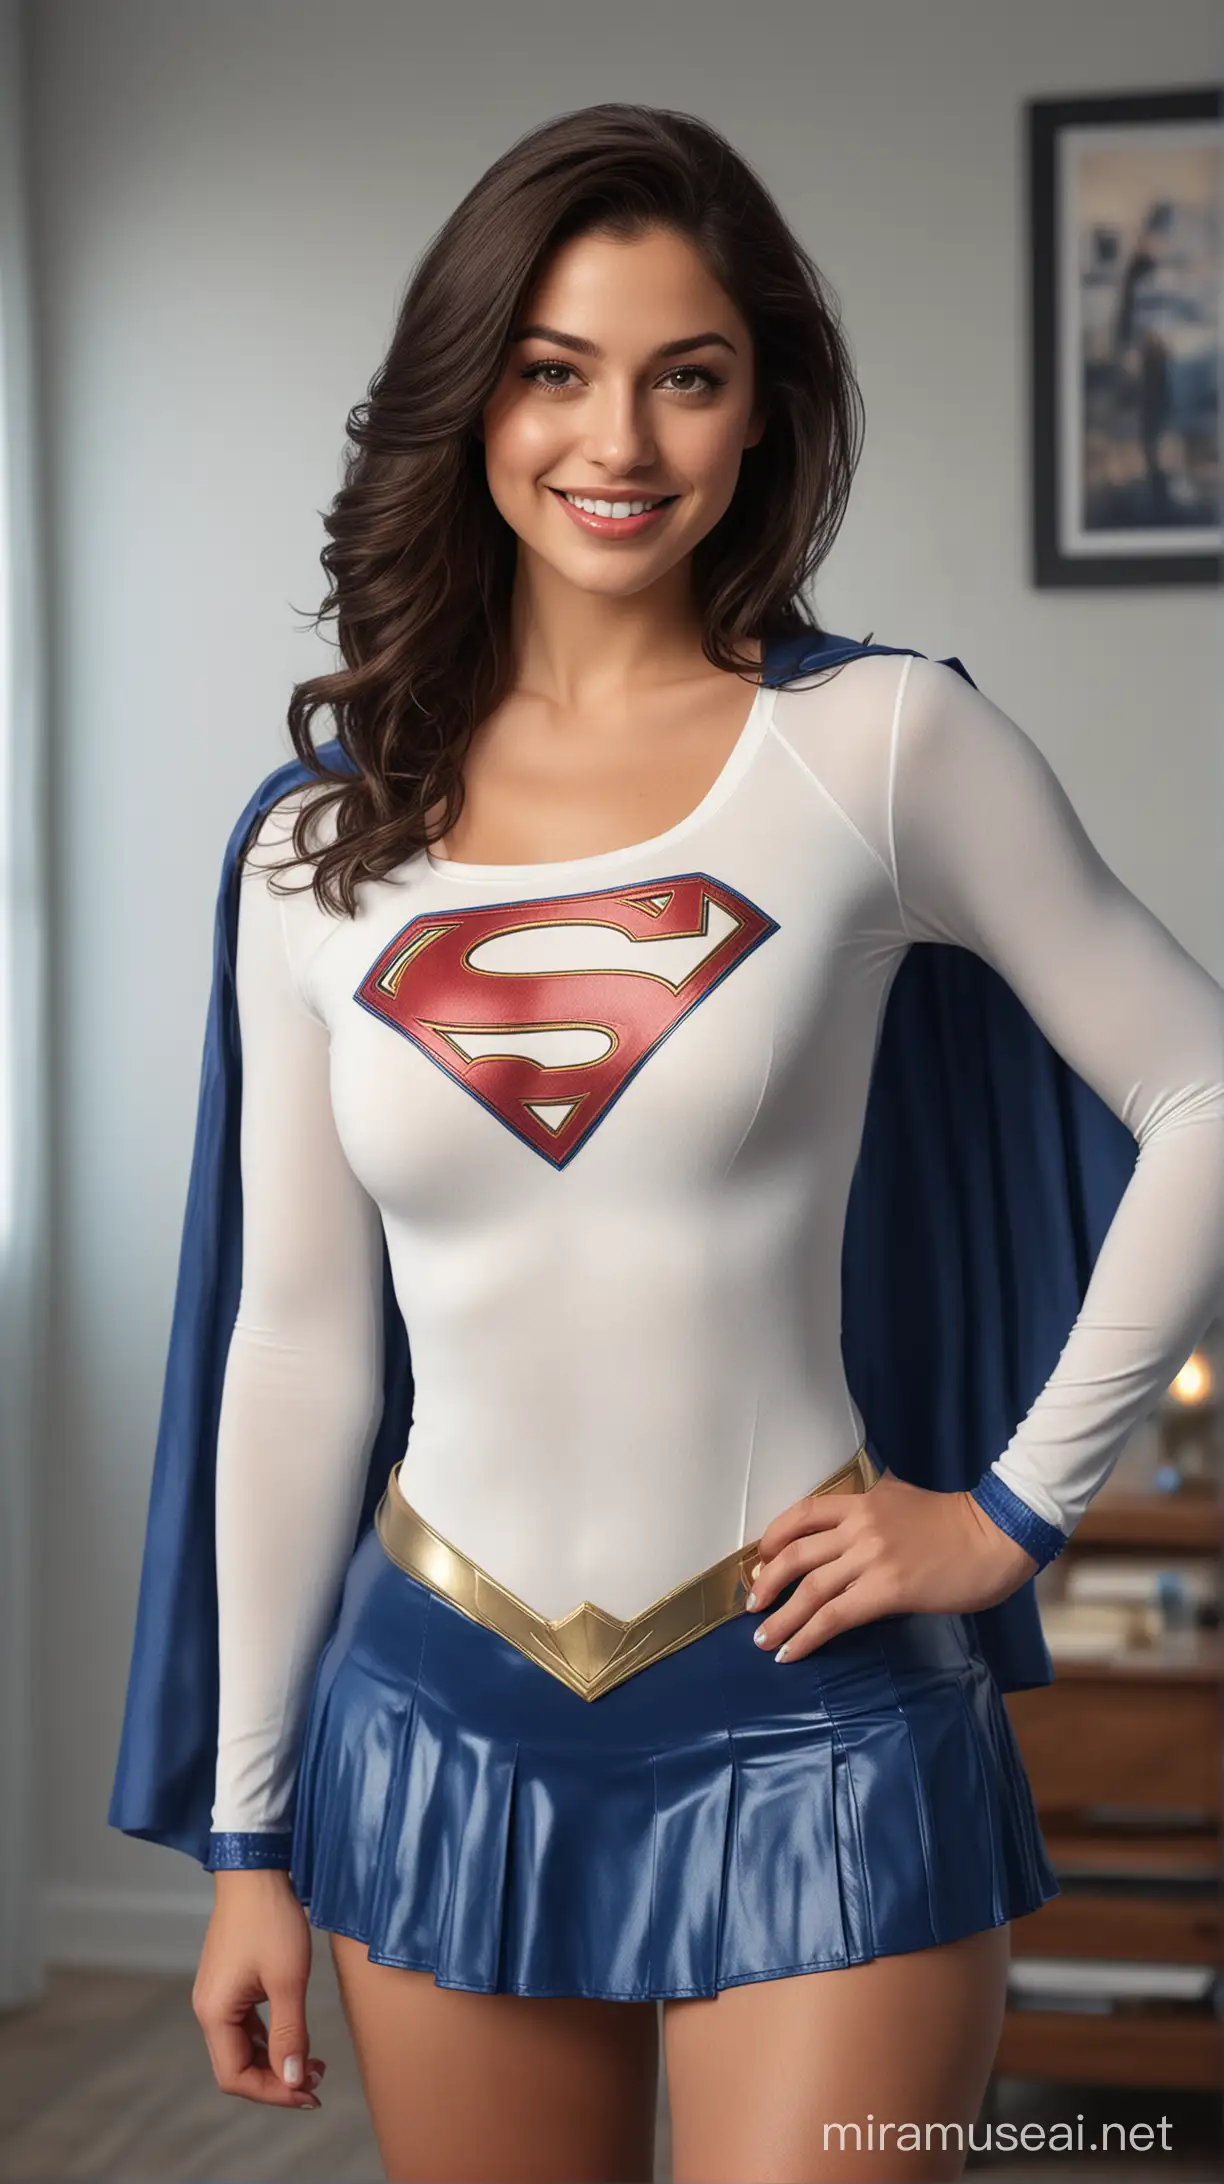 Stunning Supergirl Portrait Captivating Beauty in a Spotless Room